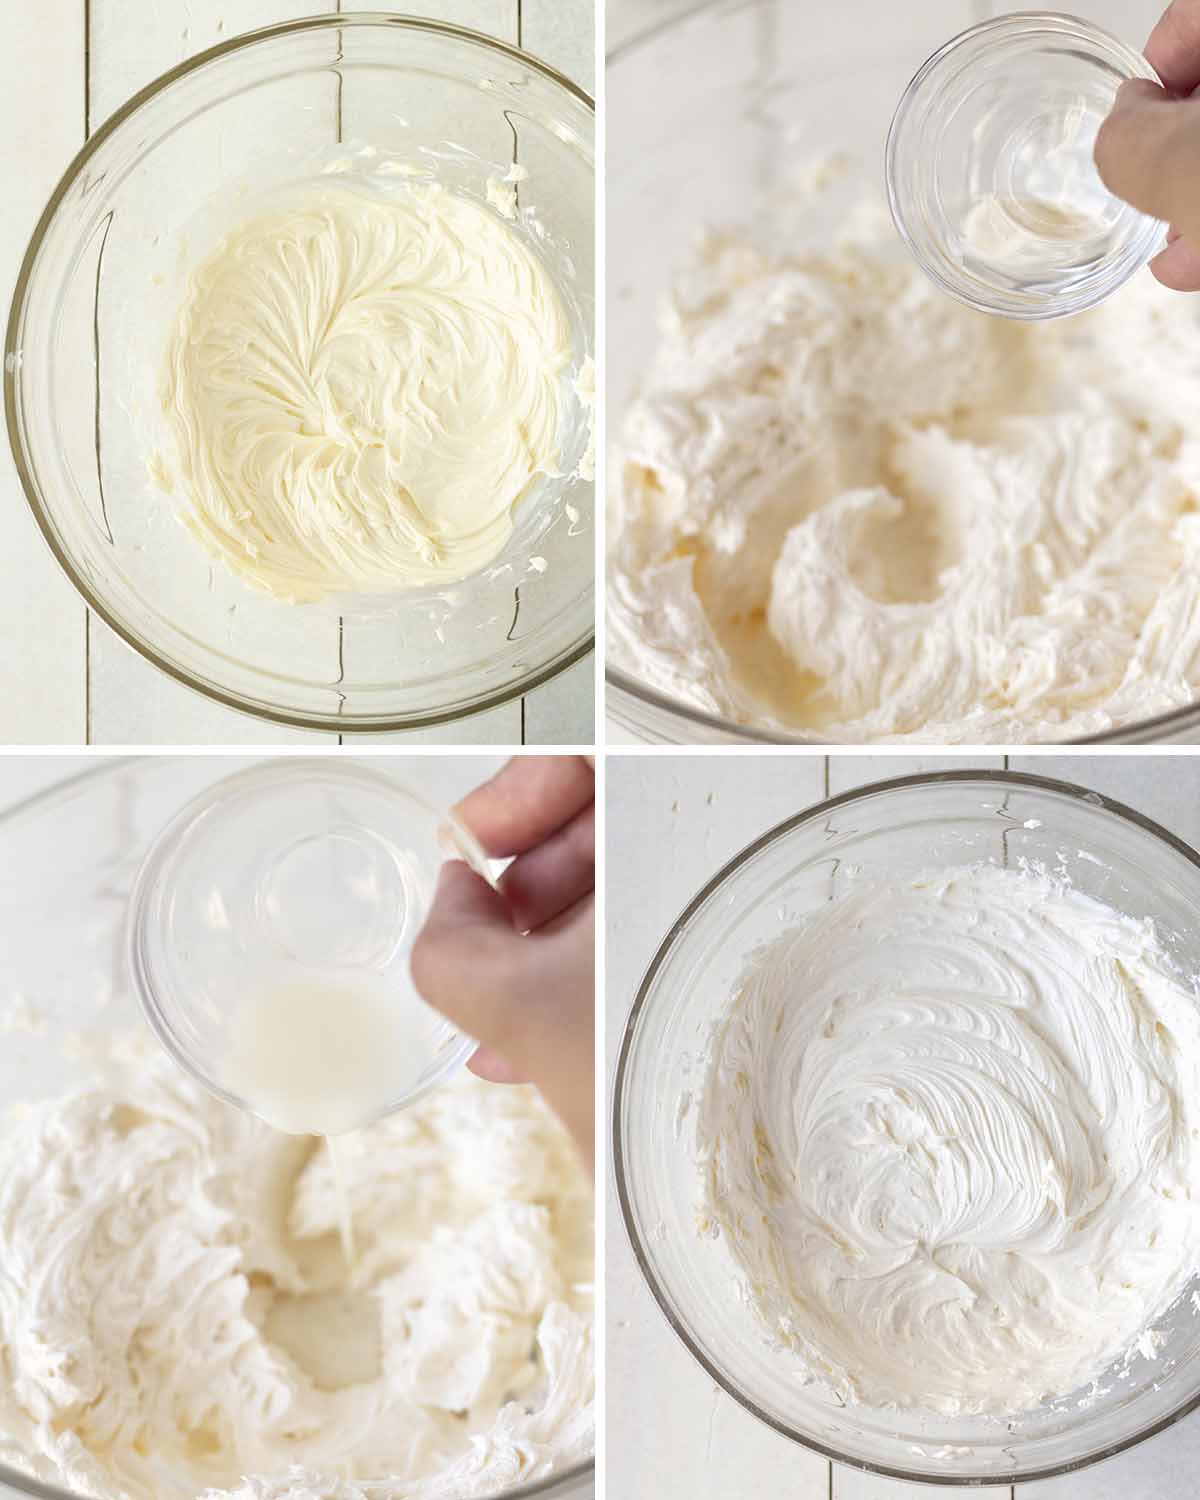 A collage of four images showing the sequence of steps to make peppermint buttercream frosting.